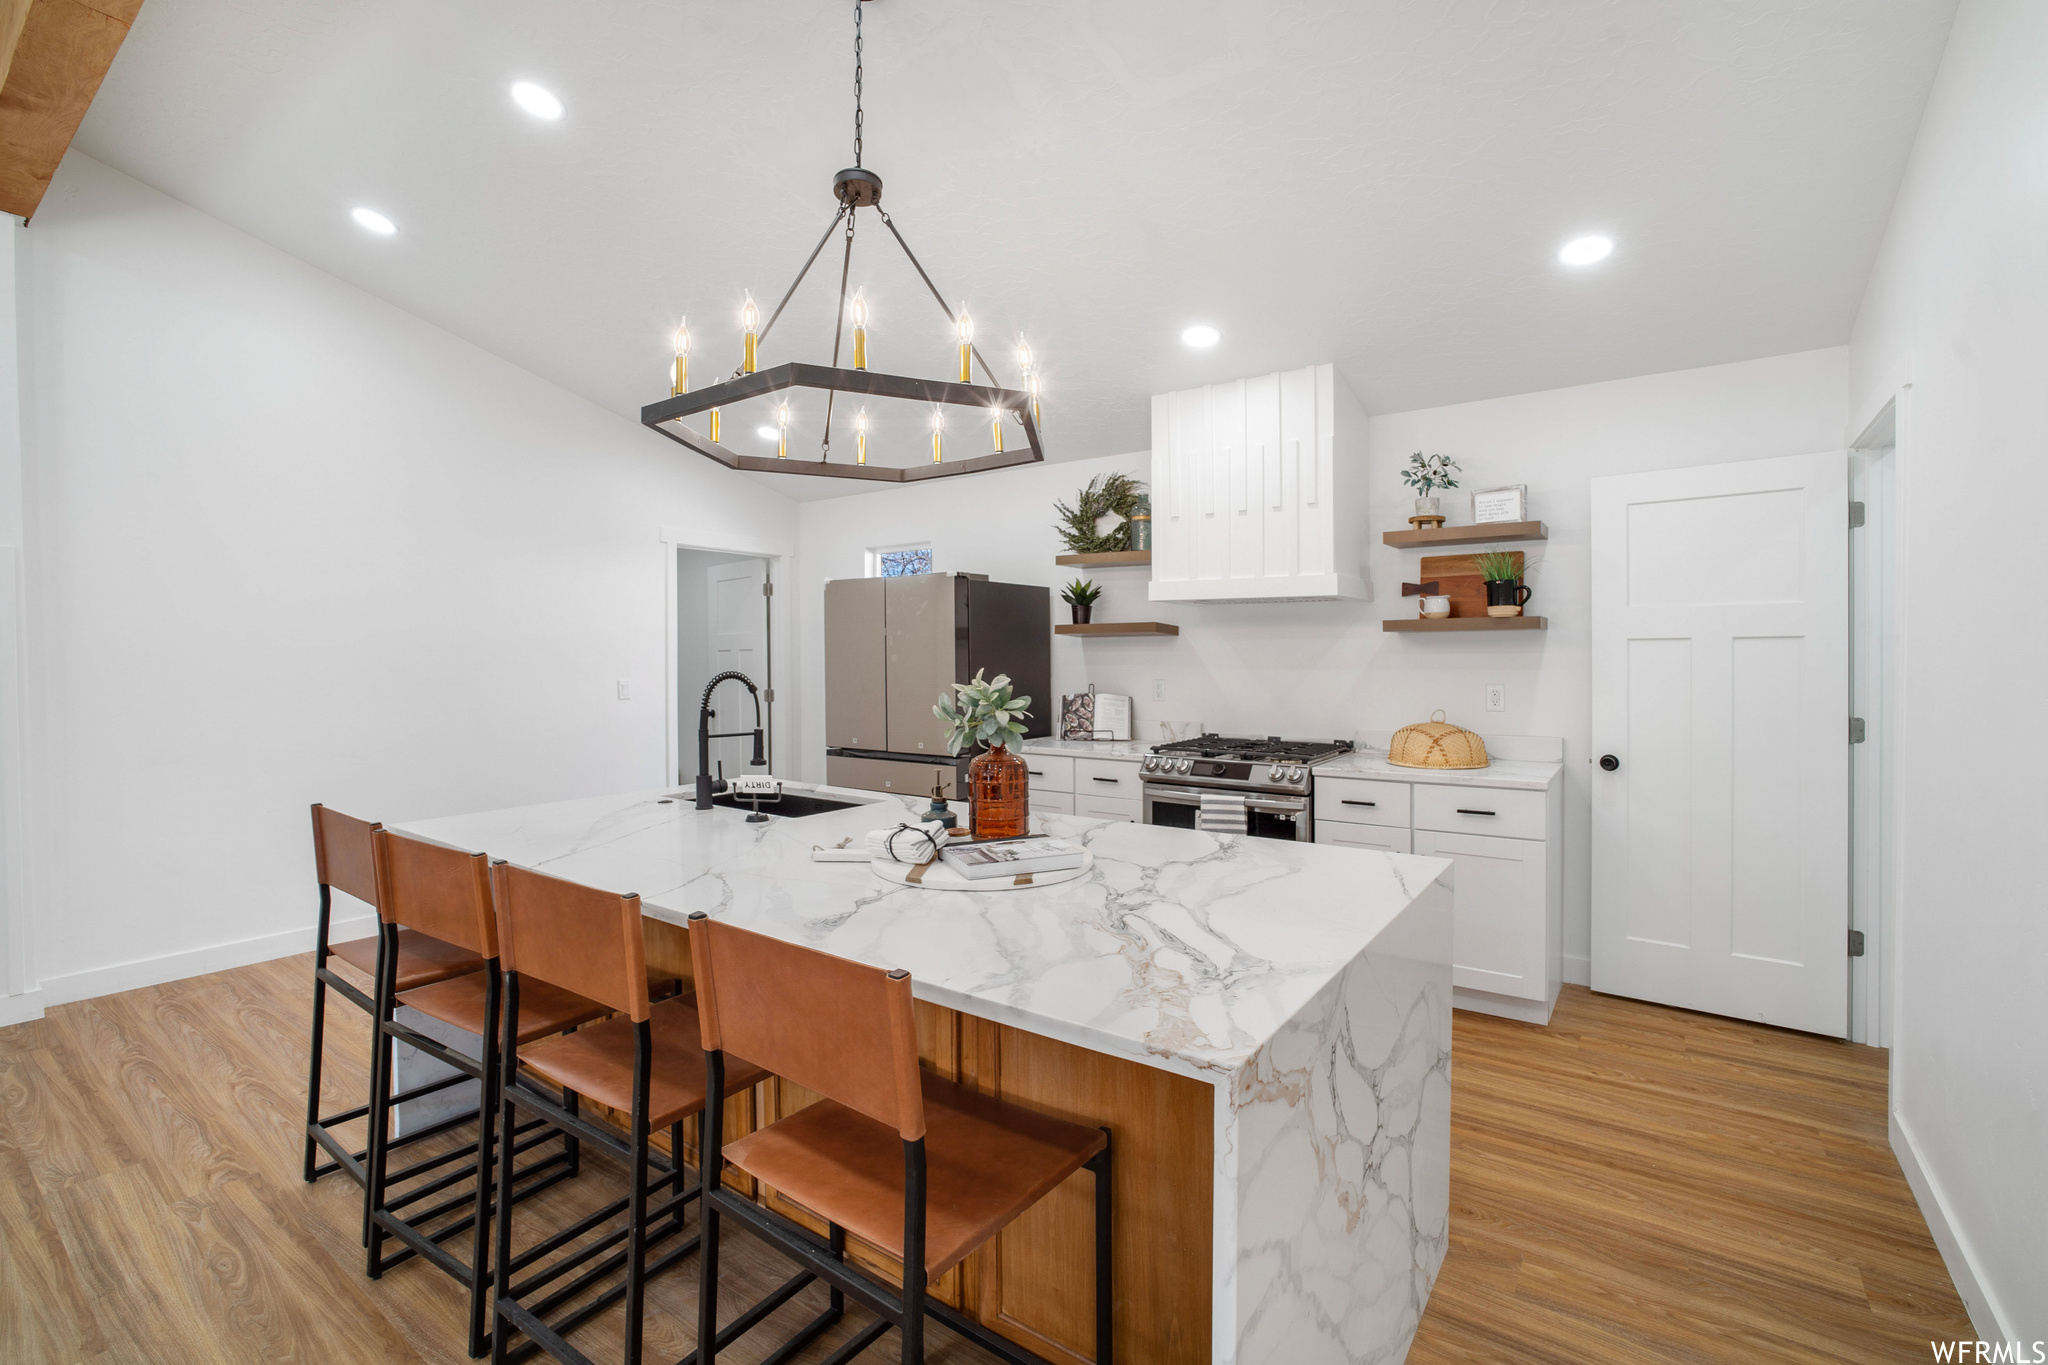 Kitchen with light wood-type flooring, a kitchen island with sink, white cabinets, and stainless steel appliances